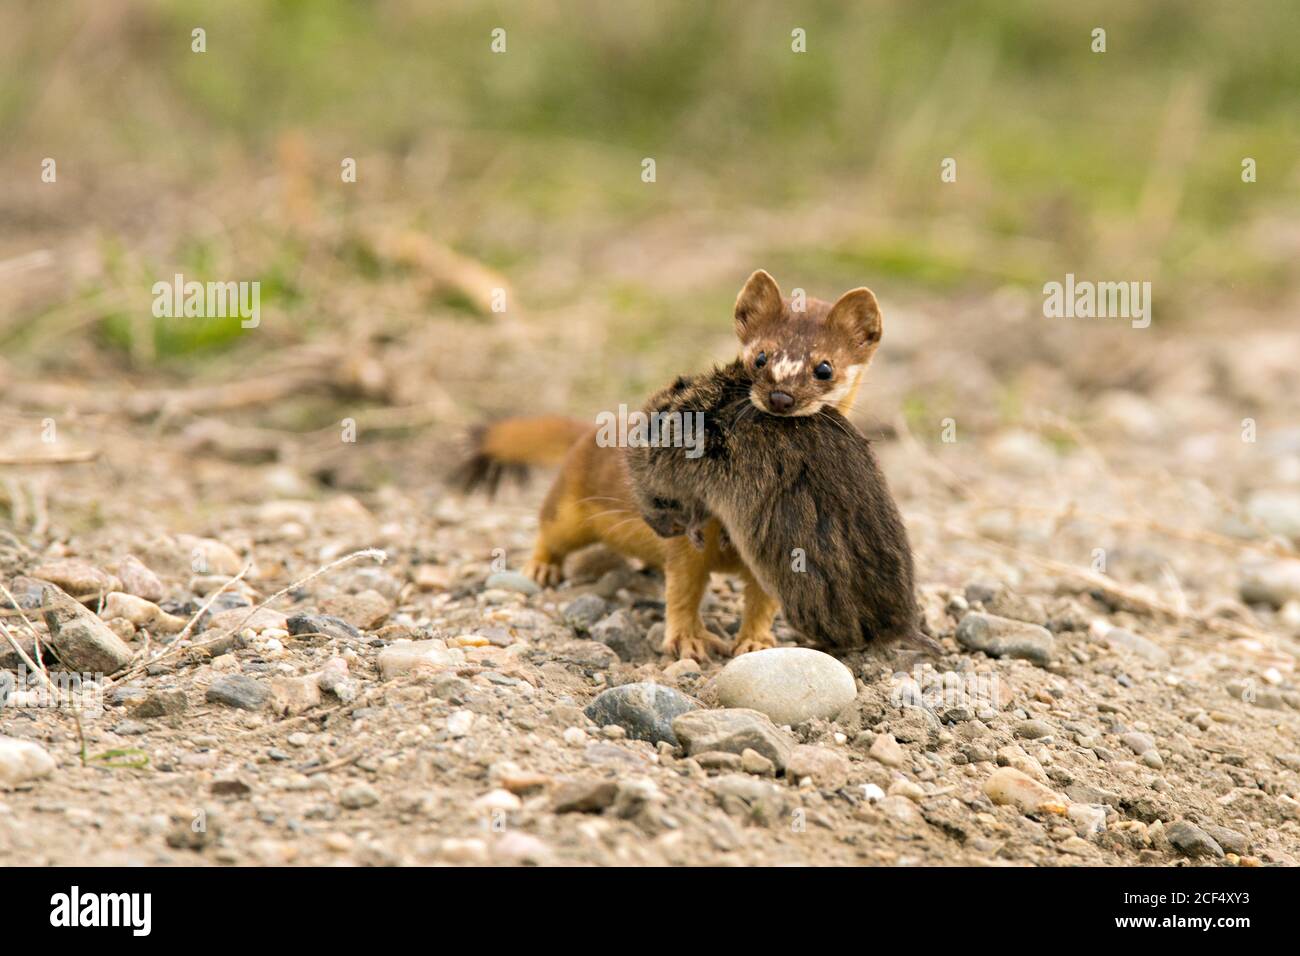 Weasel with prey Stock Photo